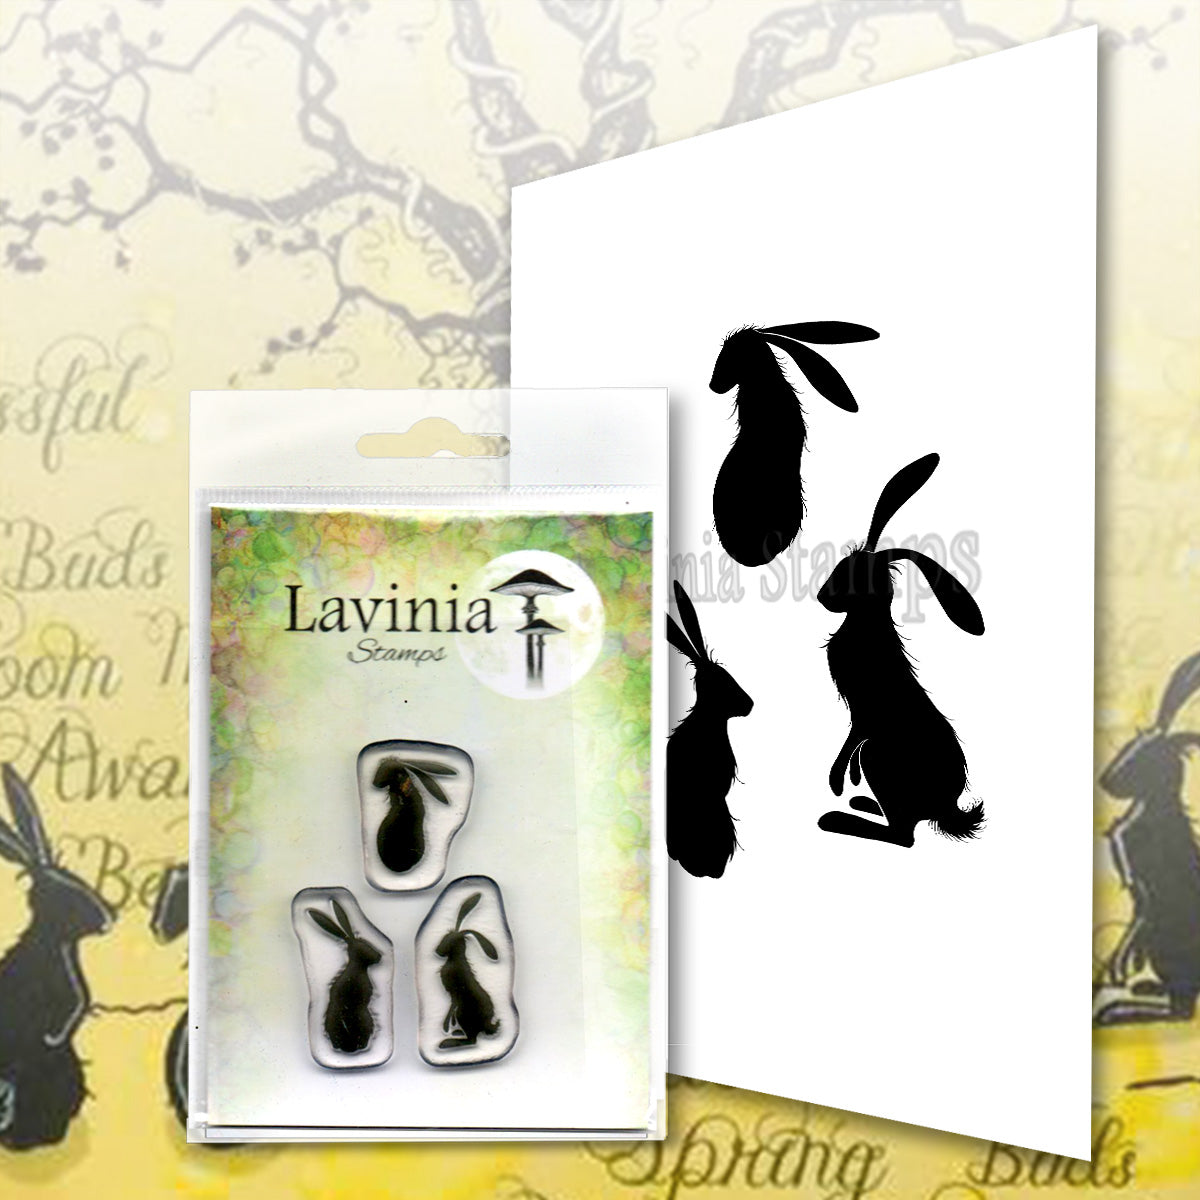 Lavinia Stamps - Wild Hares Arts & Crafts Lavivia Stamps